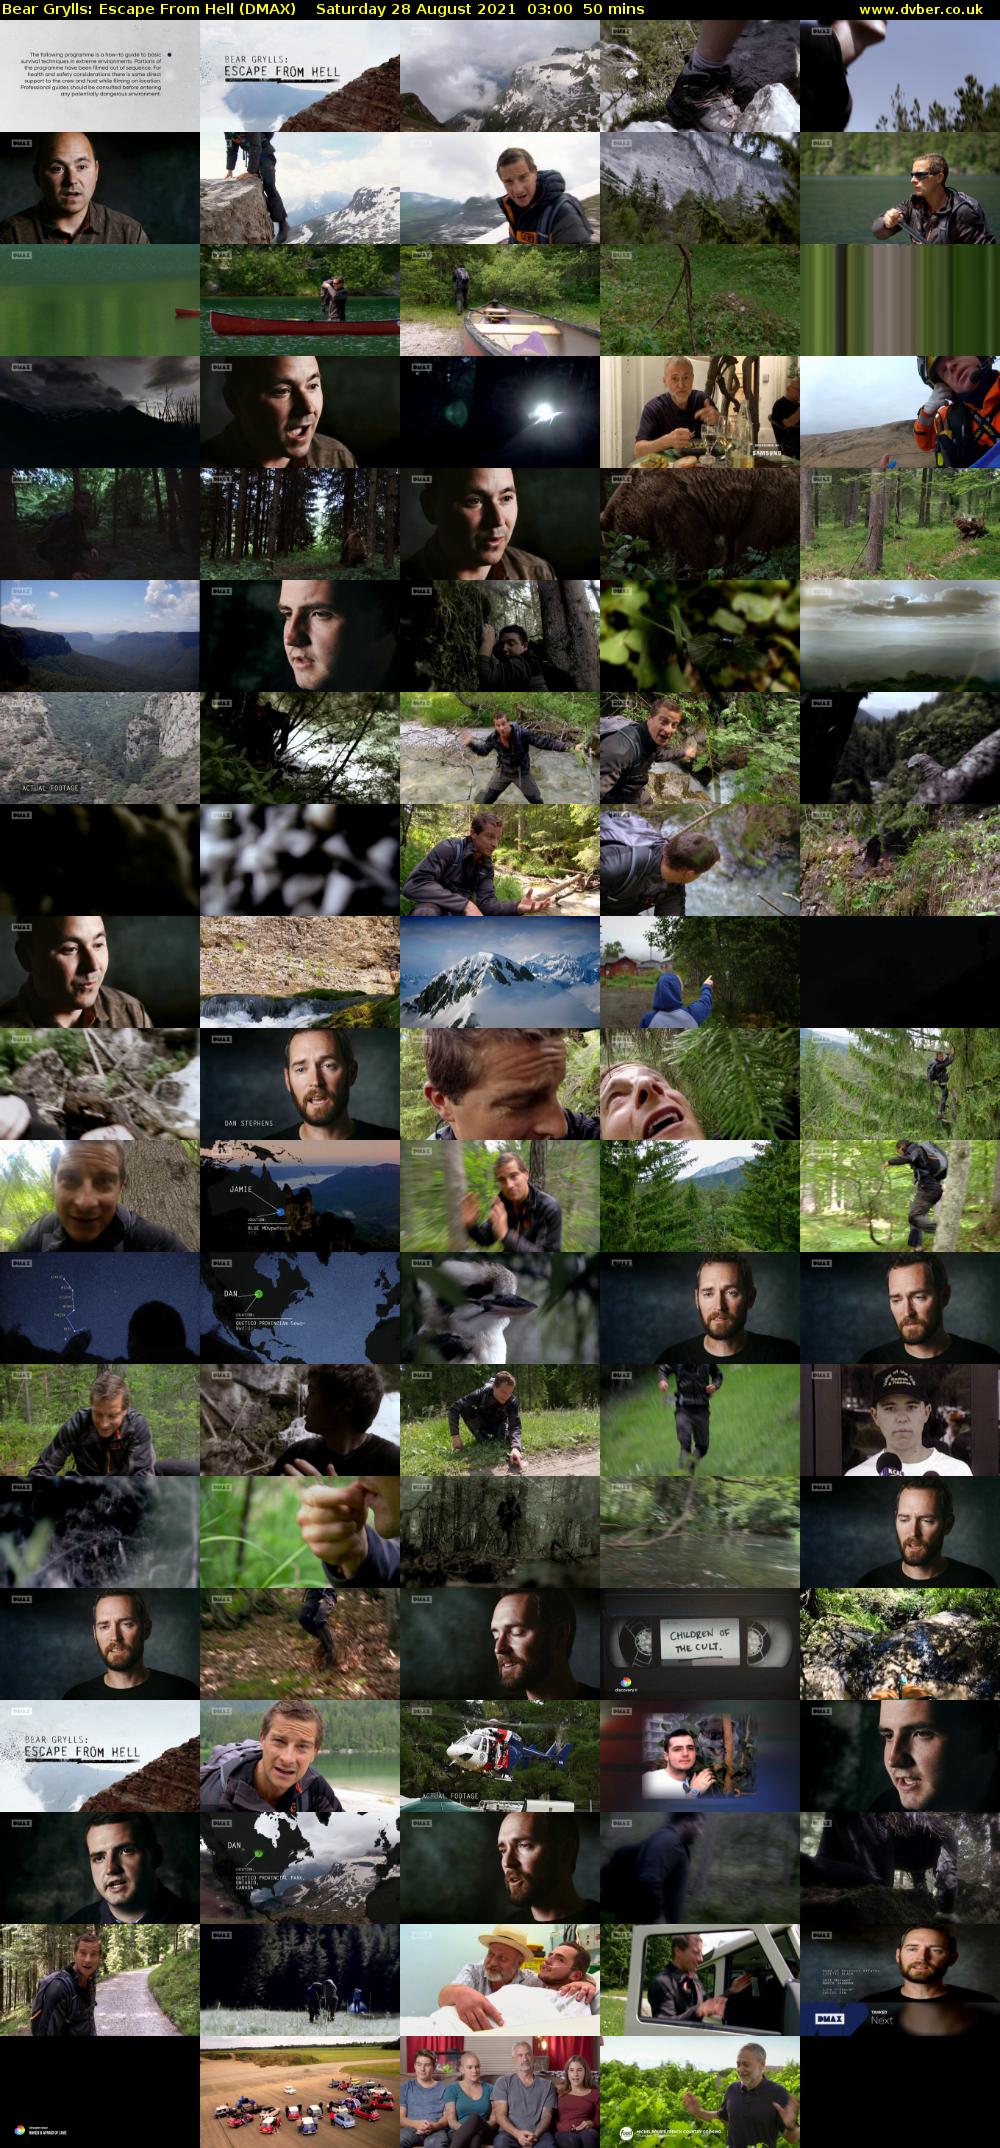 Bear Grylls: Escape From Hell (DMAX) Saturday 28 August 2021 03:00 - 03:50